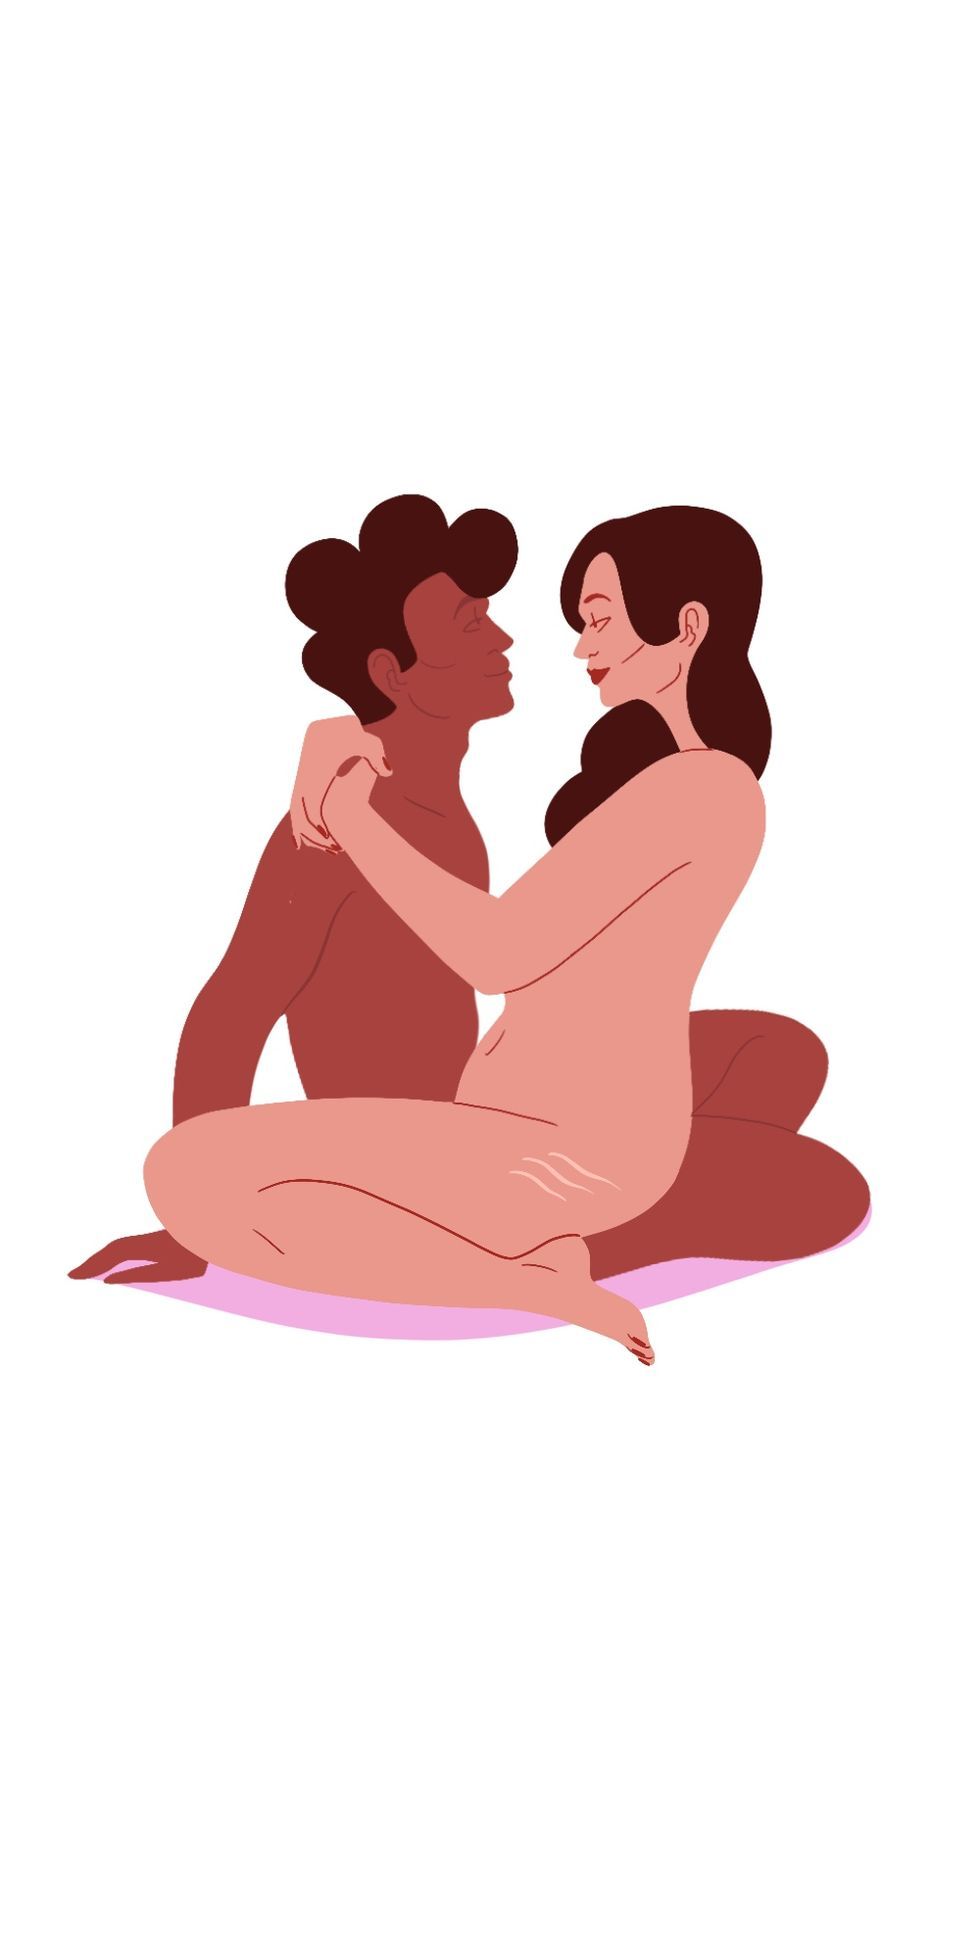 Our much loved sex position